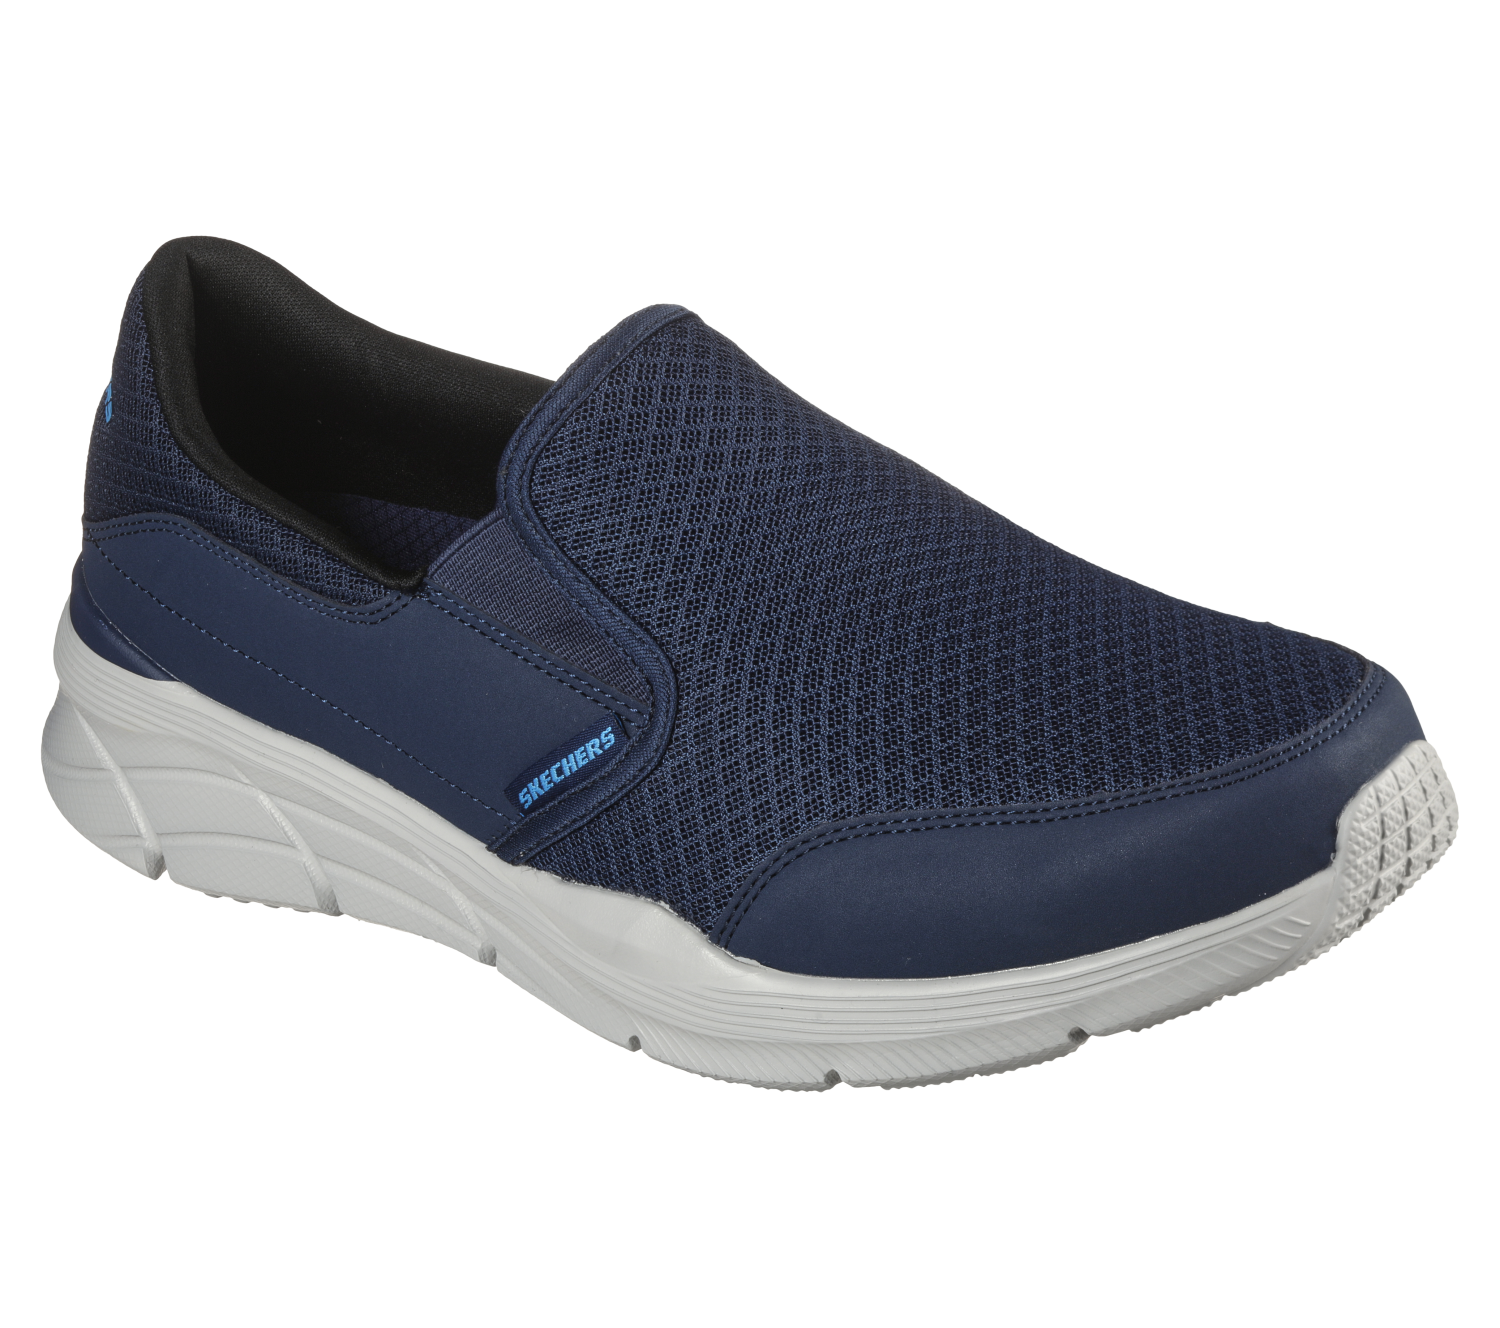 Foto de producto: Relaxed fit: equalizer 4.0 - persisting